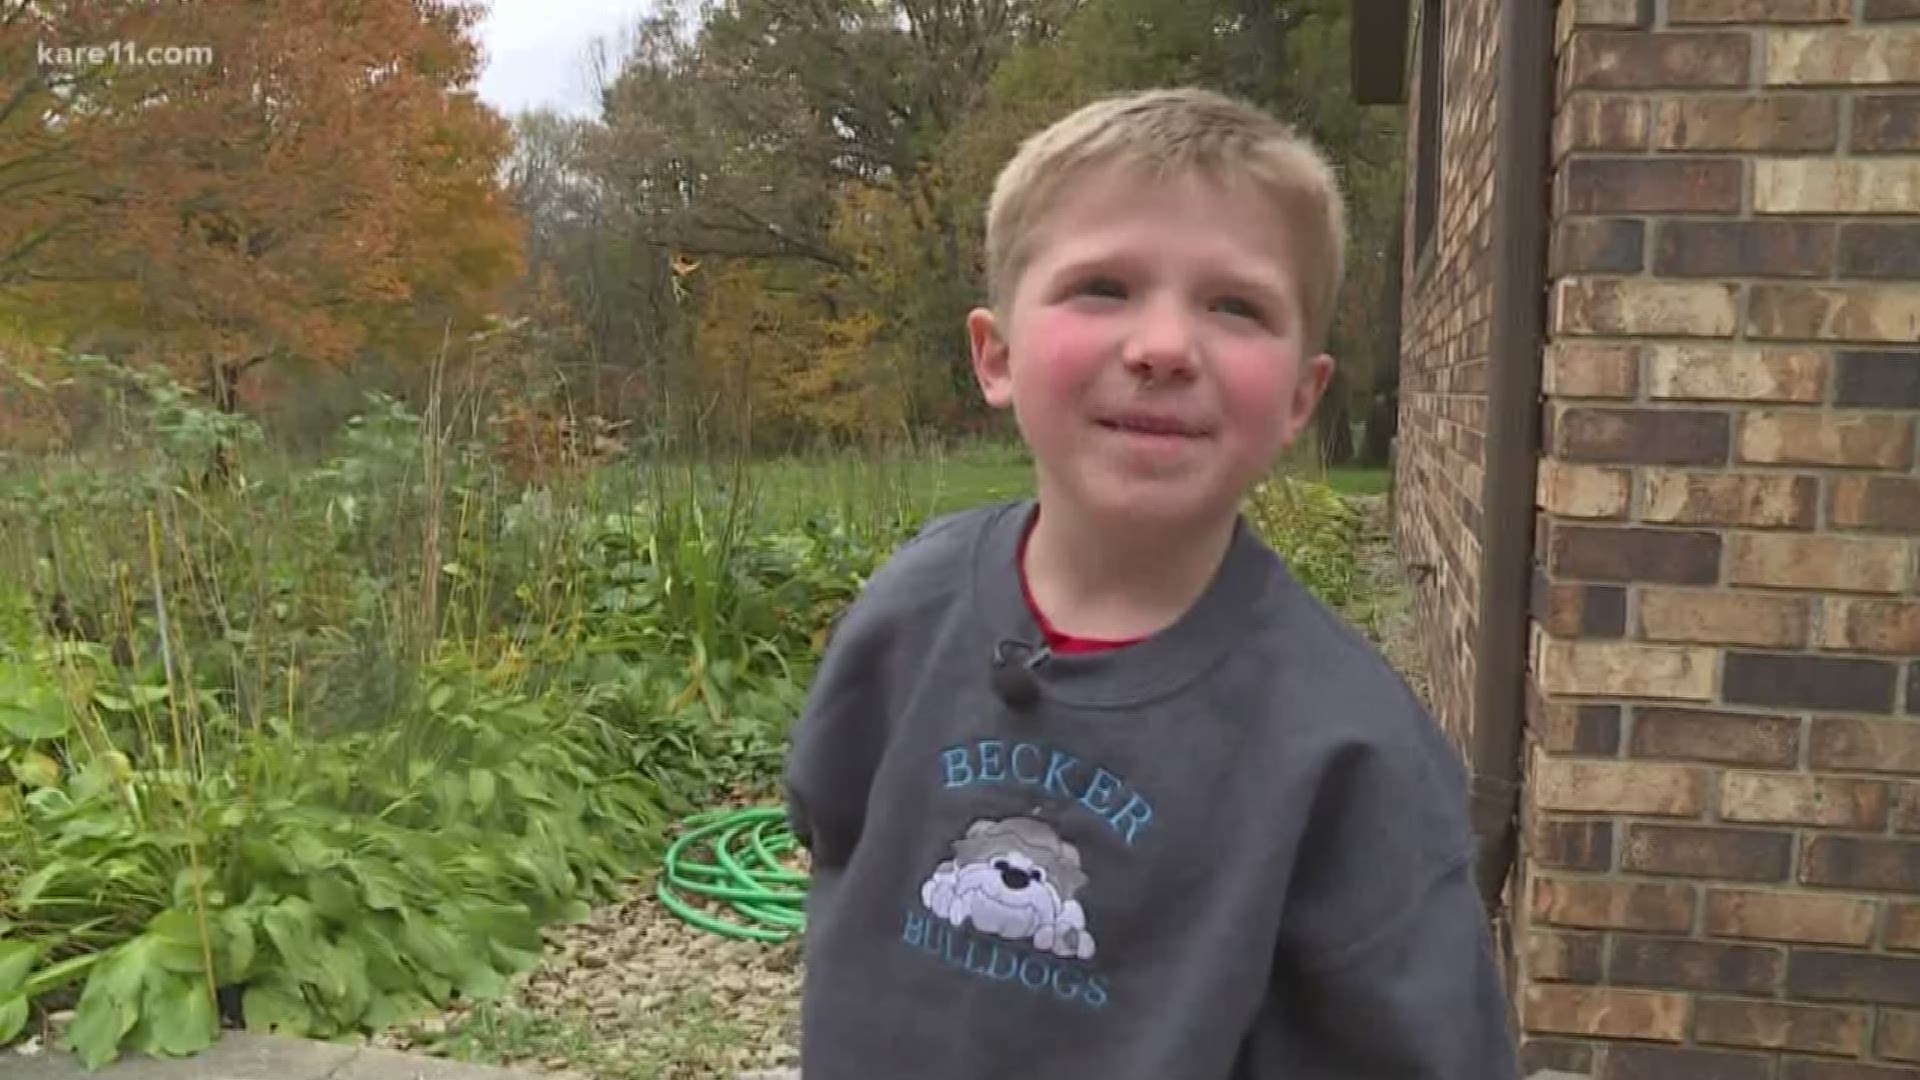 Six-year-old Ethan Haus thanks search teams who helped bring him back home with his dog.